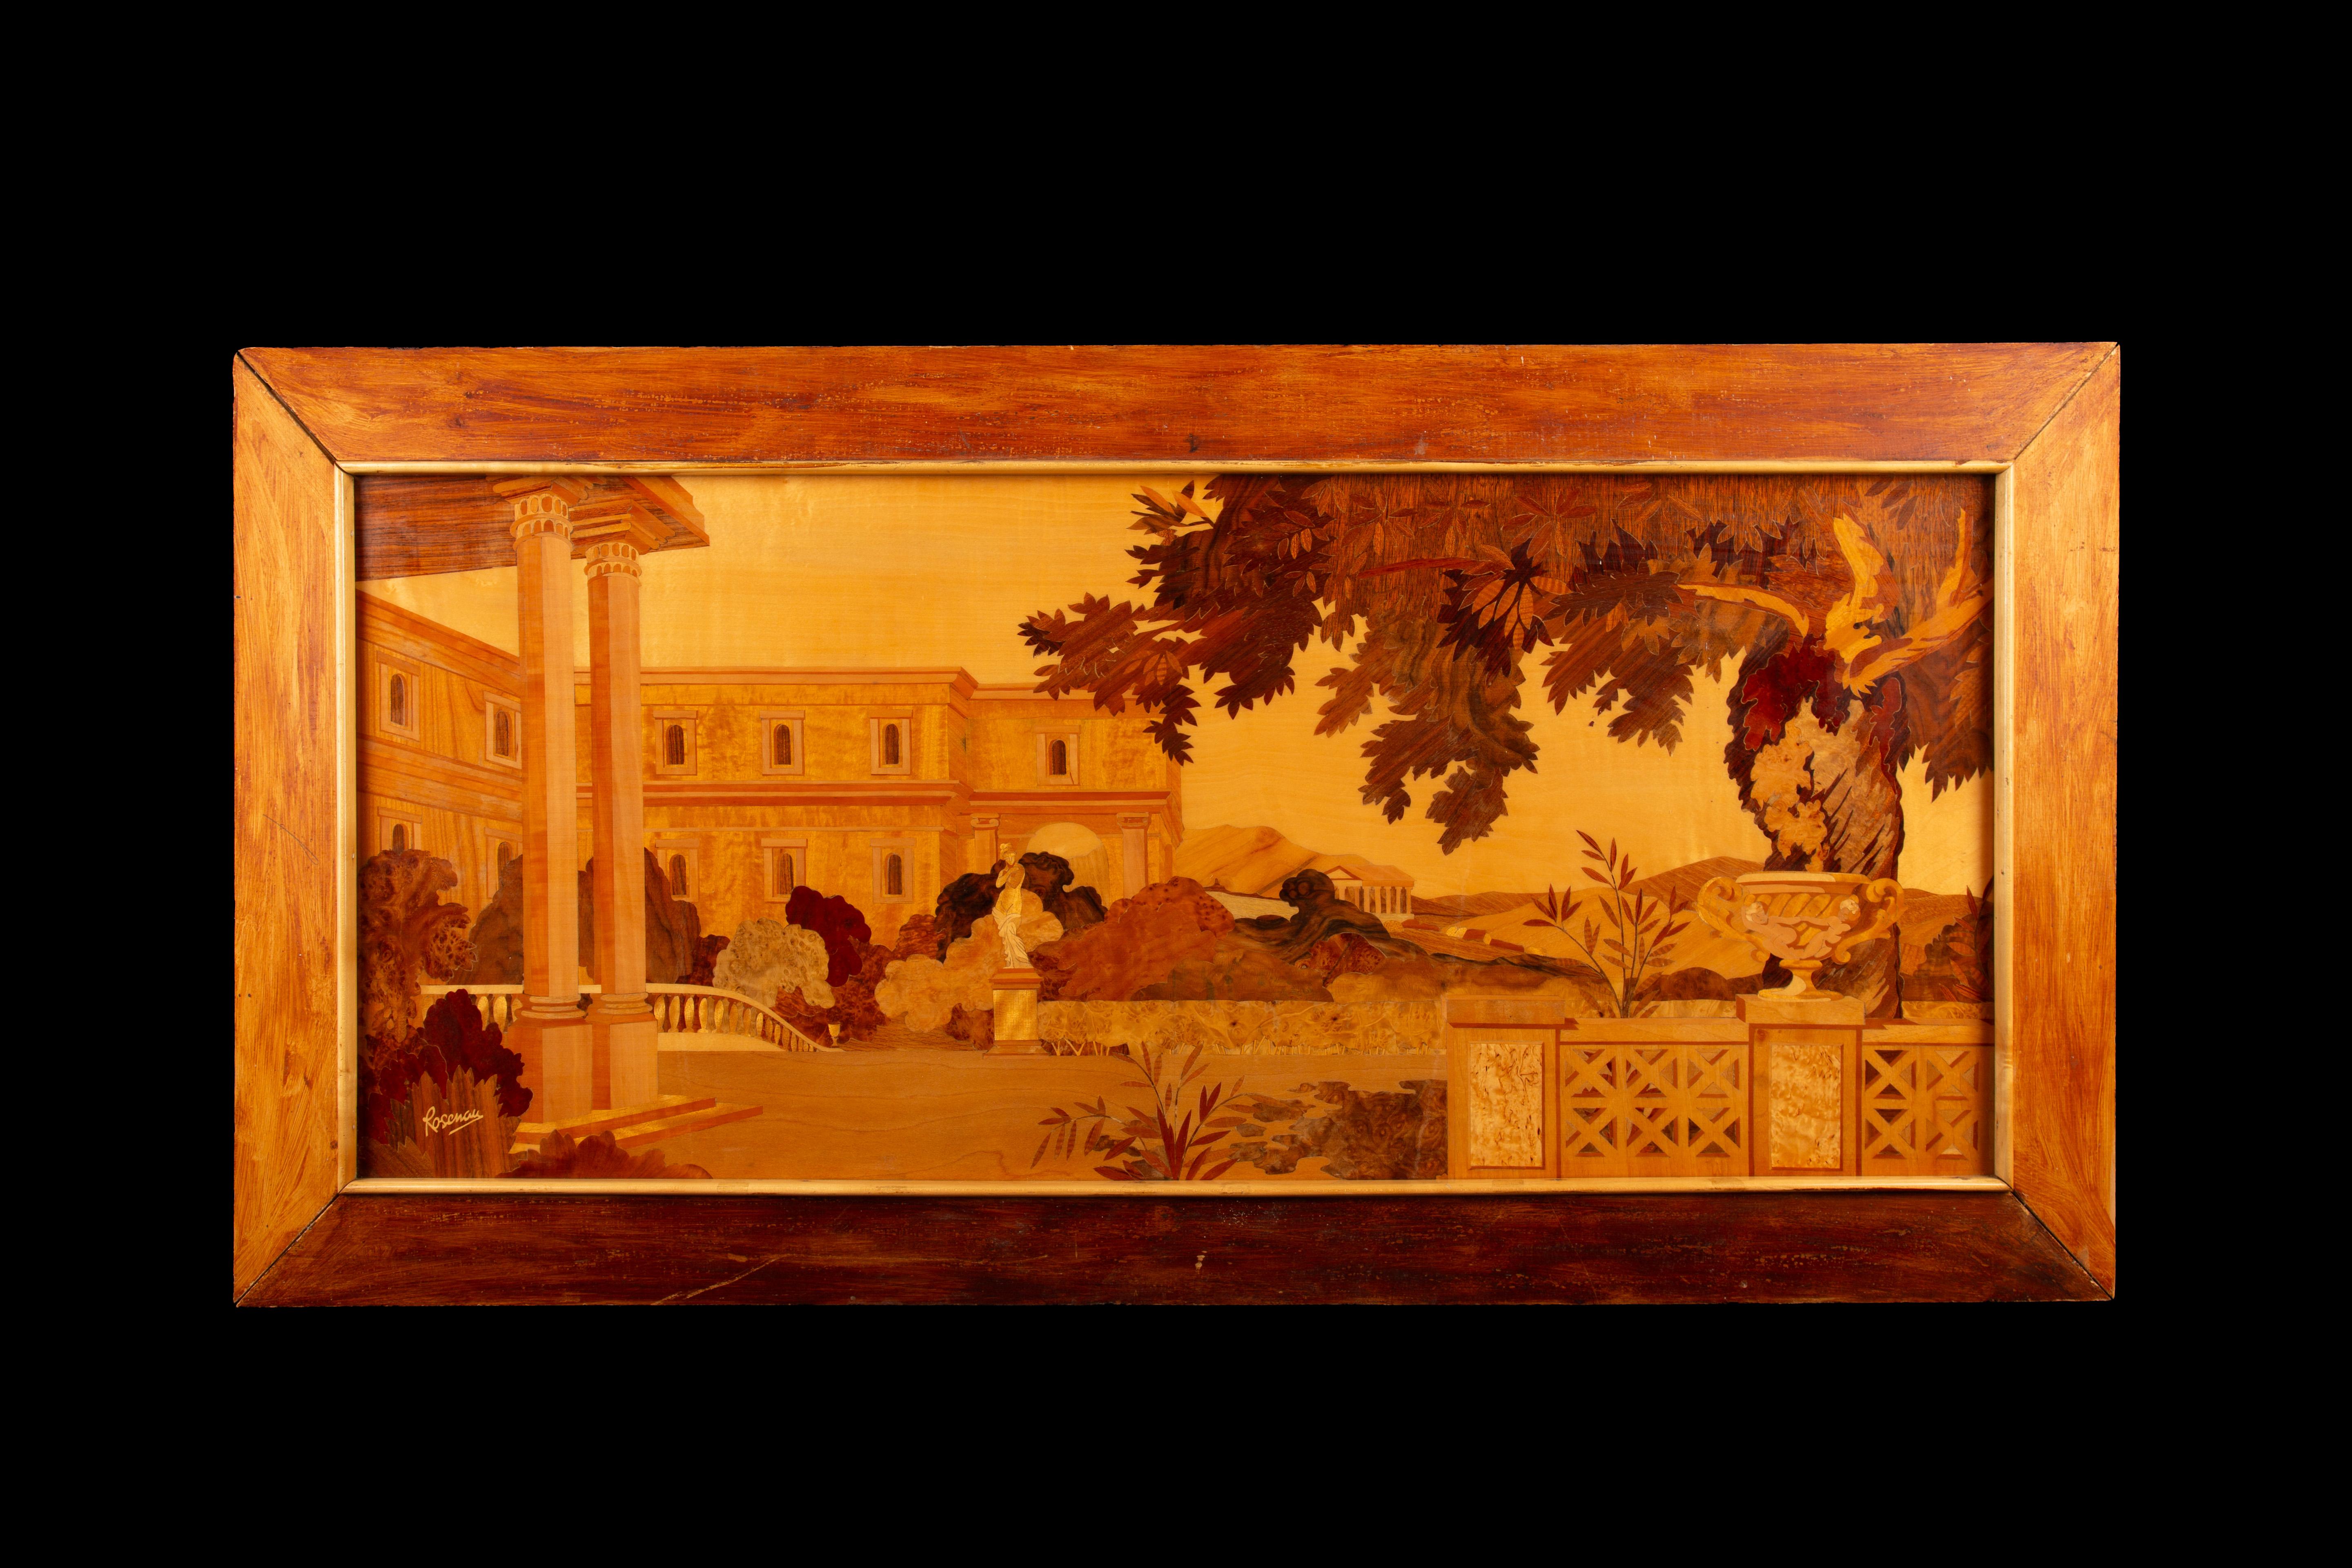 This early 20th century marquetry panel by Pierre Rosenau portrays a captivating classical scene of a terrace and garden set against the backdrop of an ancient temple. This exquisite artwork showcases Rosenau's mastery of the marquetry technique,